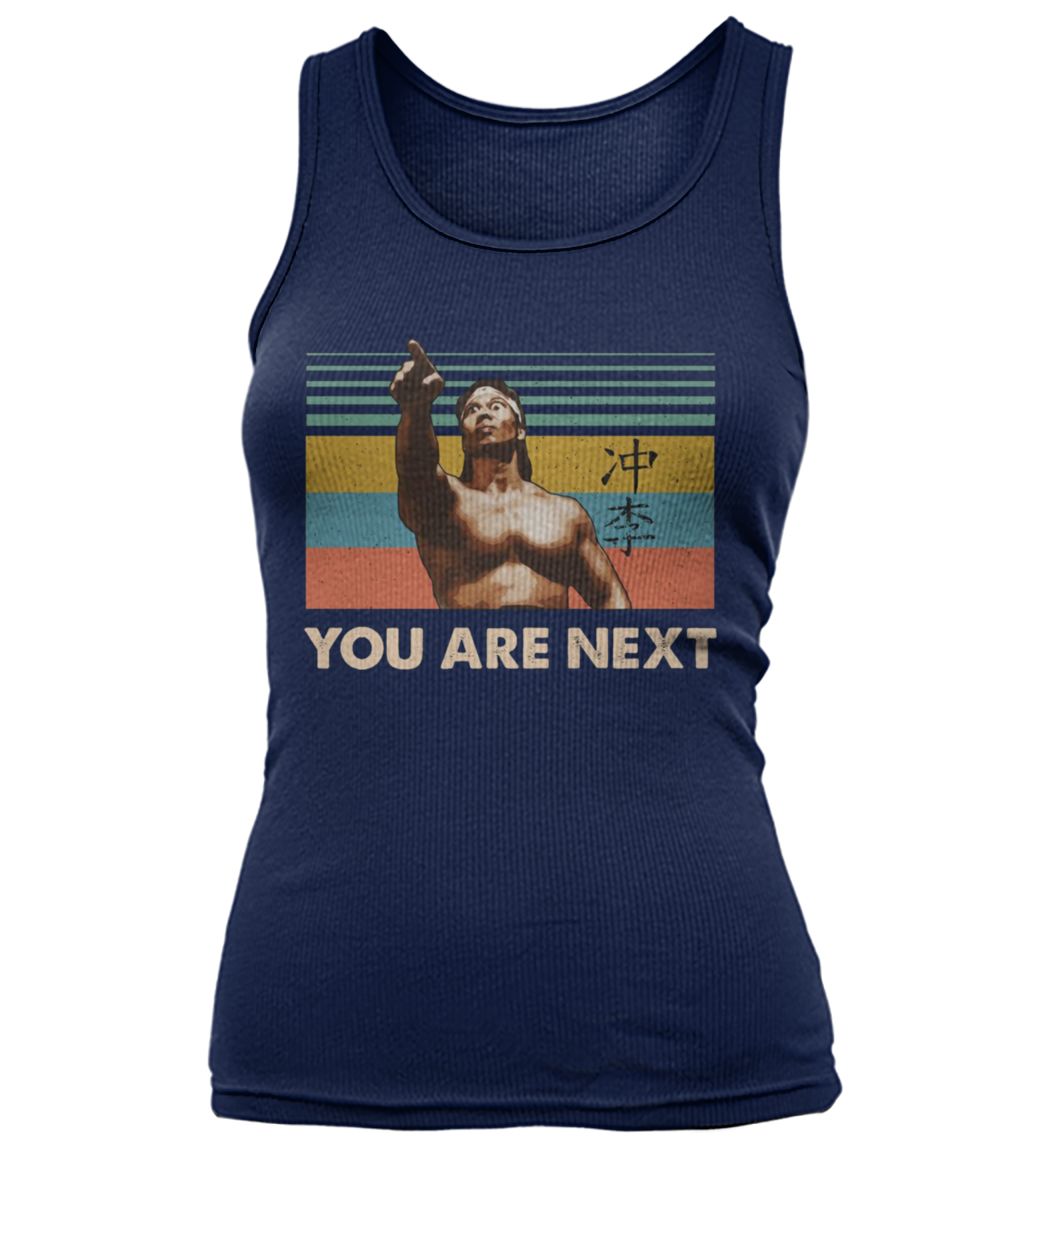 Bloodsport bolo yeung you are next vintage women's tank top